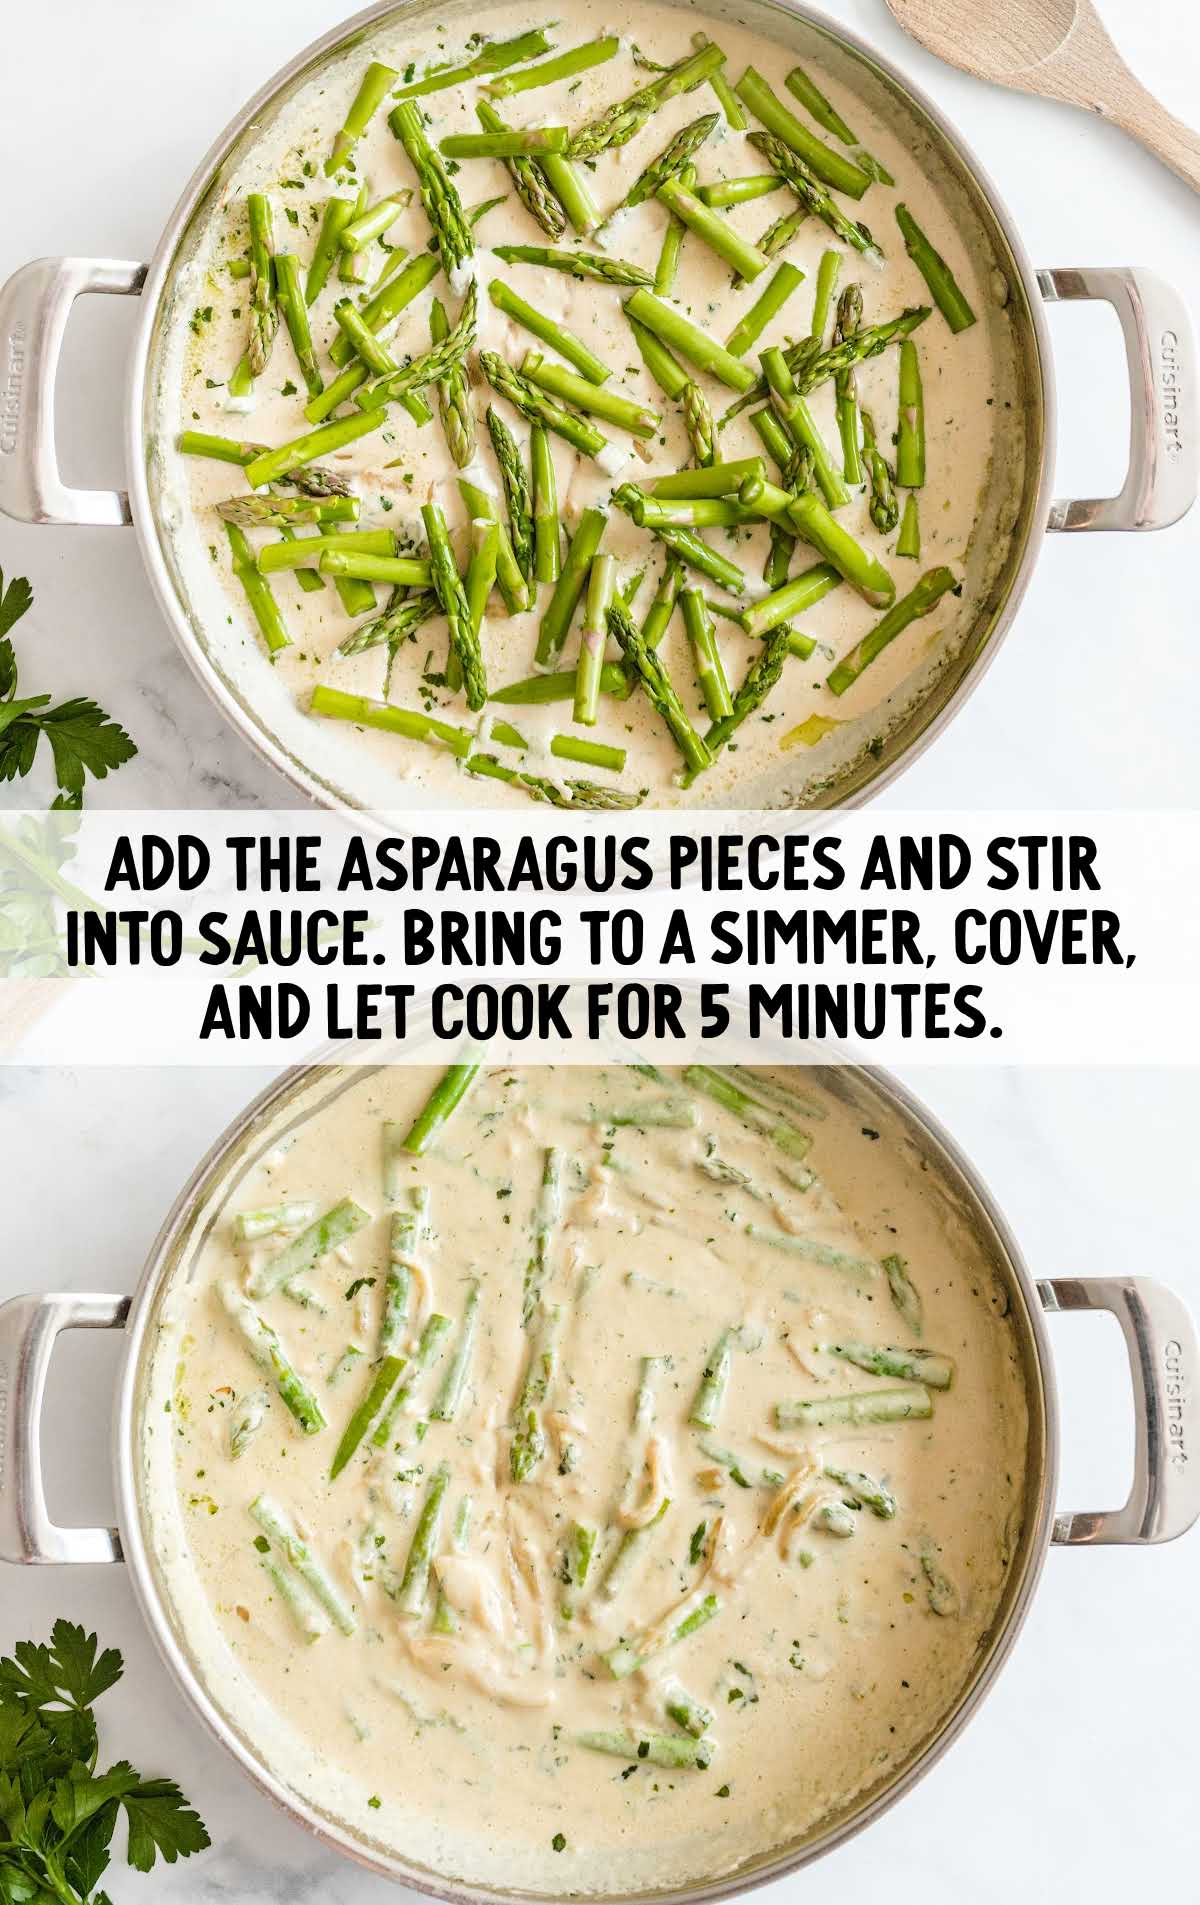 asparagus pieces added to the sauce in the skillet